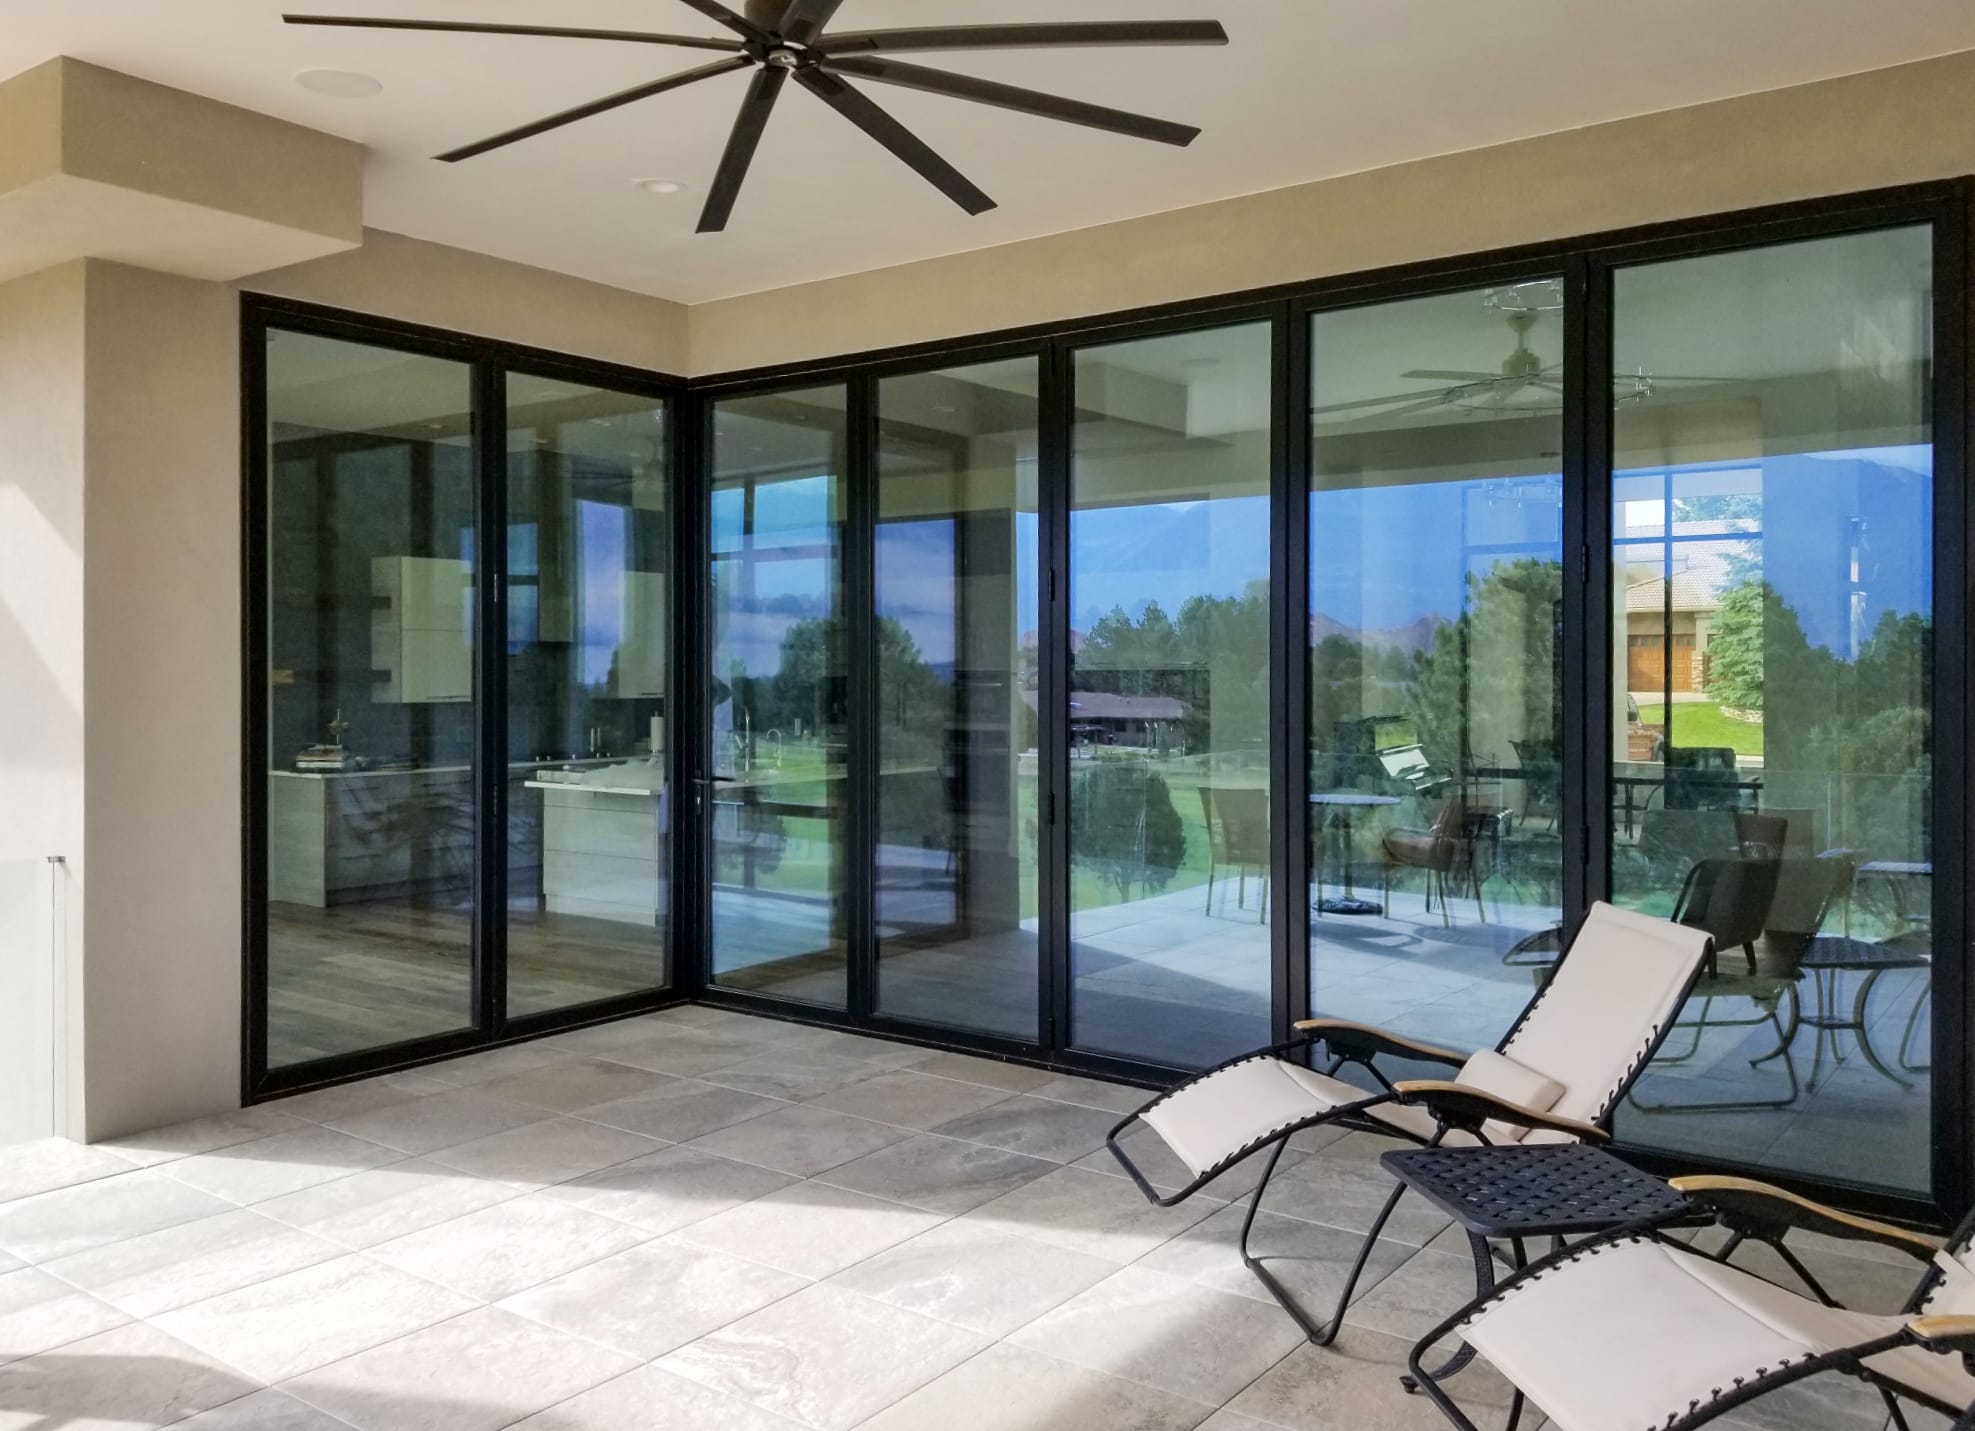 When fully closed this corner meet aluminum door system allows natural light to flood the living room.